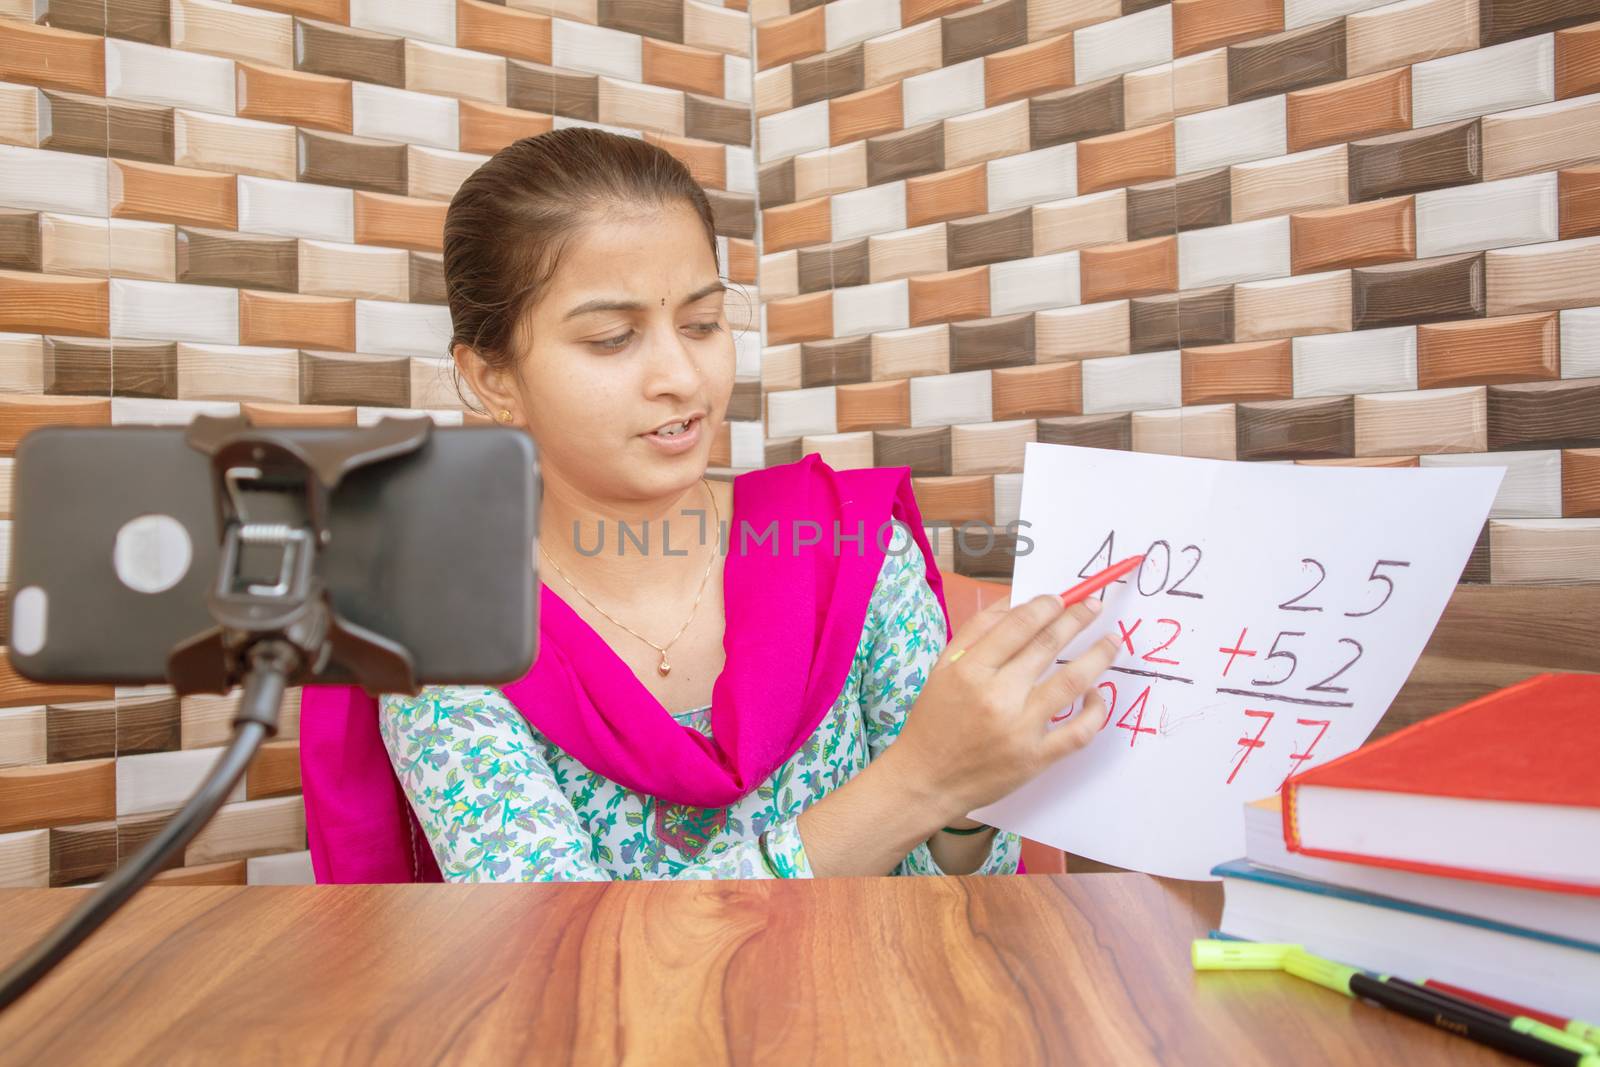 Girl taking online virtual class on mobile phone, busy in teaching at home during covid-19 or coronavirus pandemic crisis - Concept of e-teaching, online education or self isolation. by lakshmiprasad.maski@gmai.com